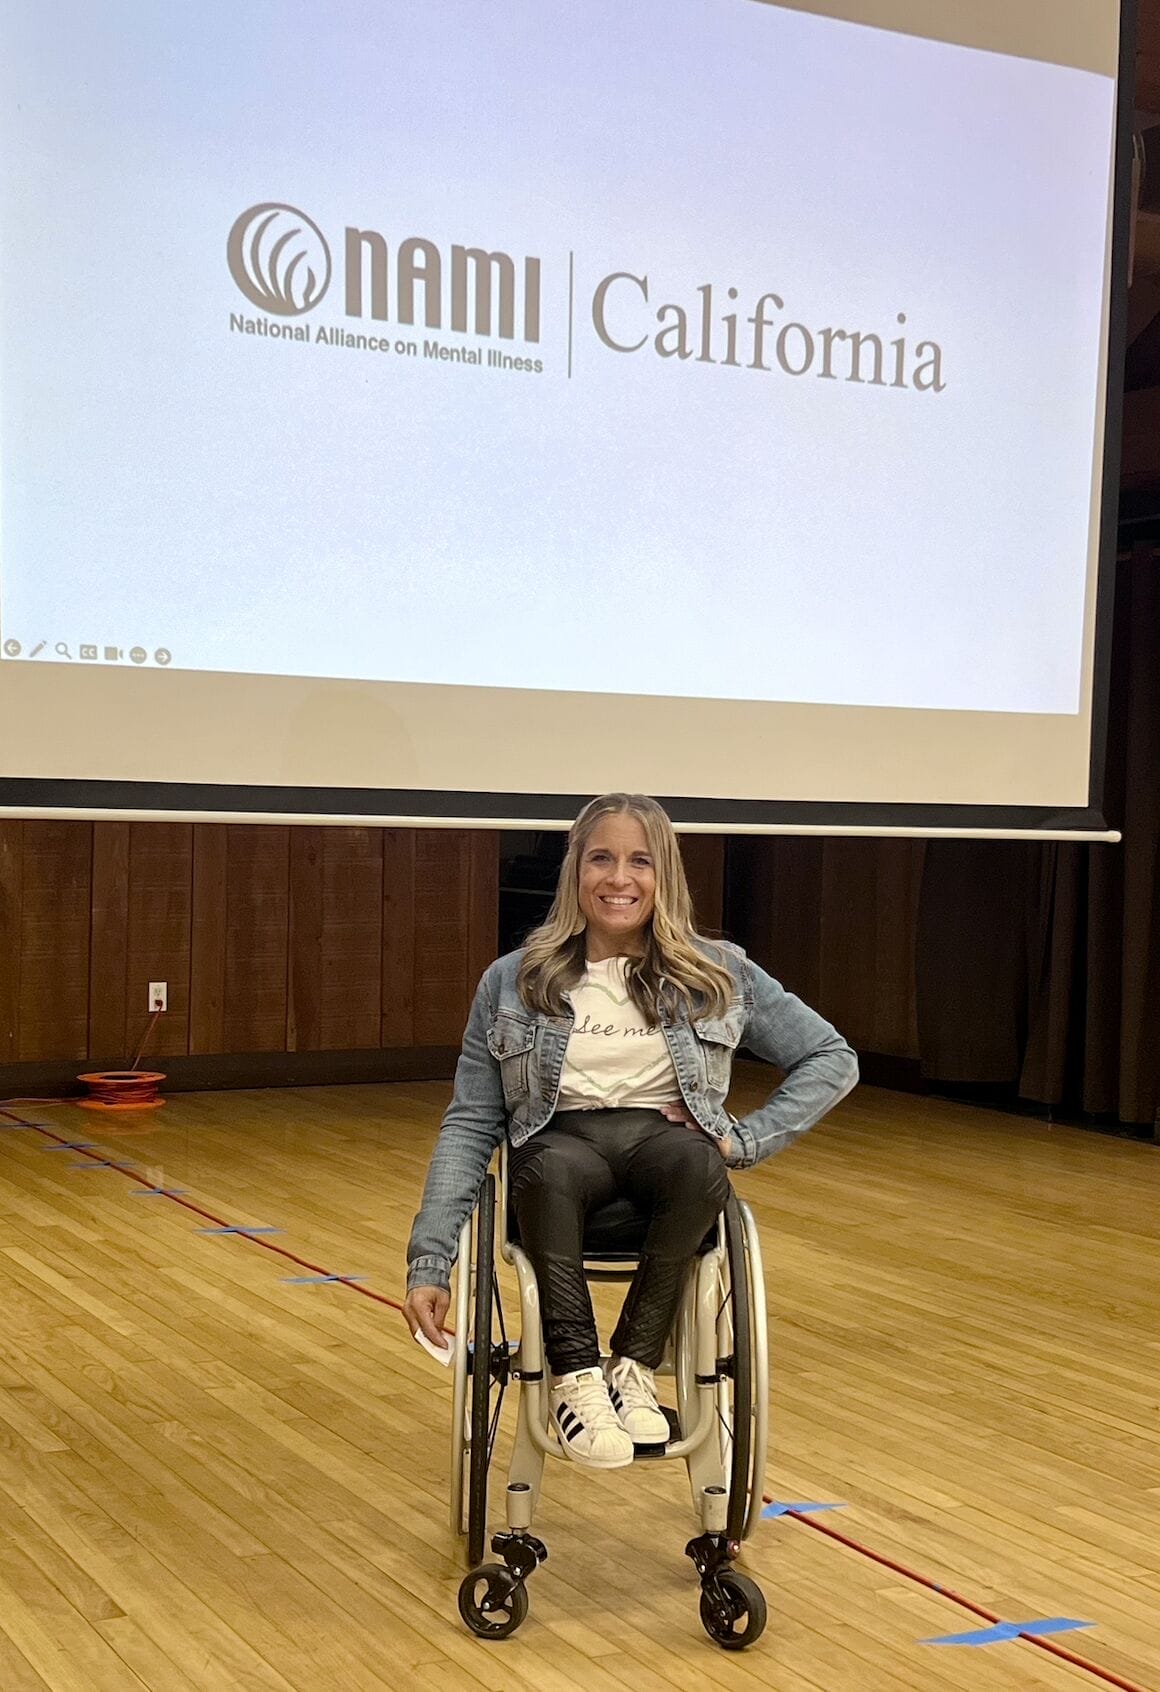 alycia sitting in her wheelchair below a large screen projecting the nami california logo